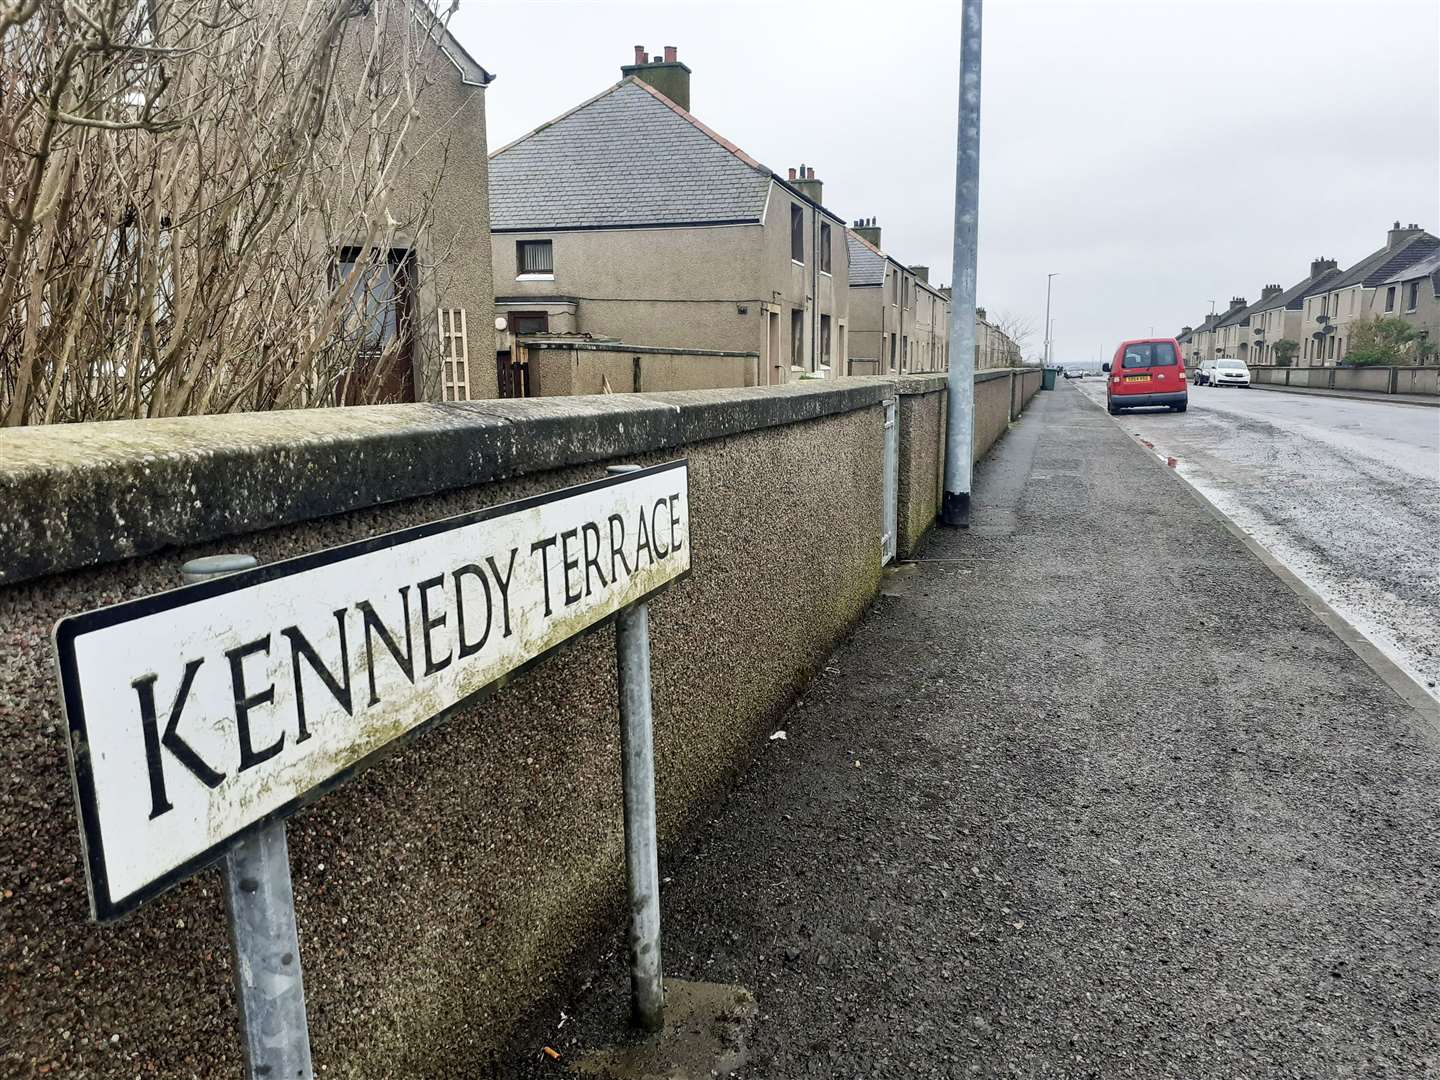 Kennedy Terrace, Wick, is the least expensive street in Caithness, according to Property Solvers' online tool.